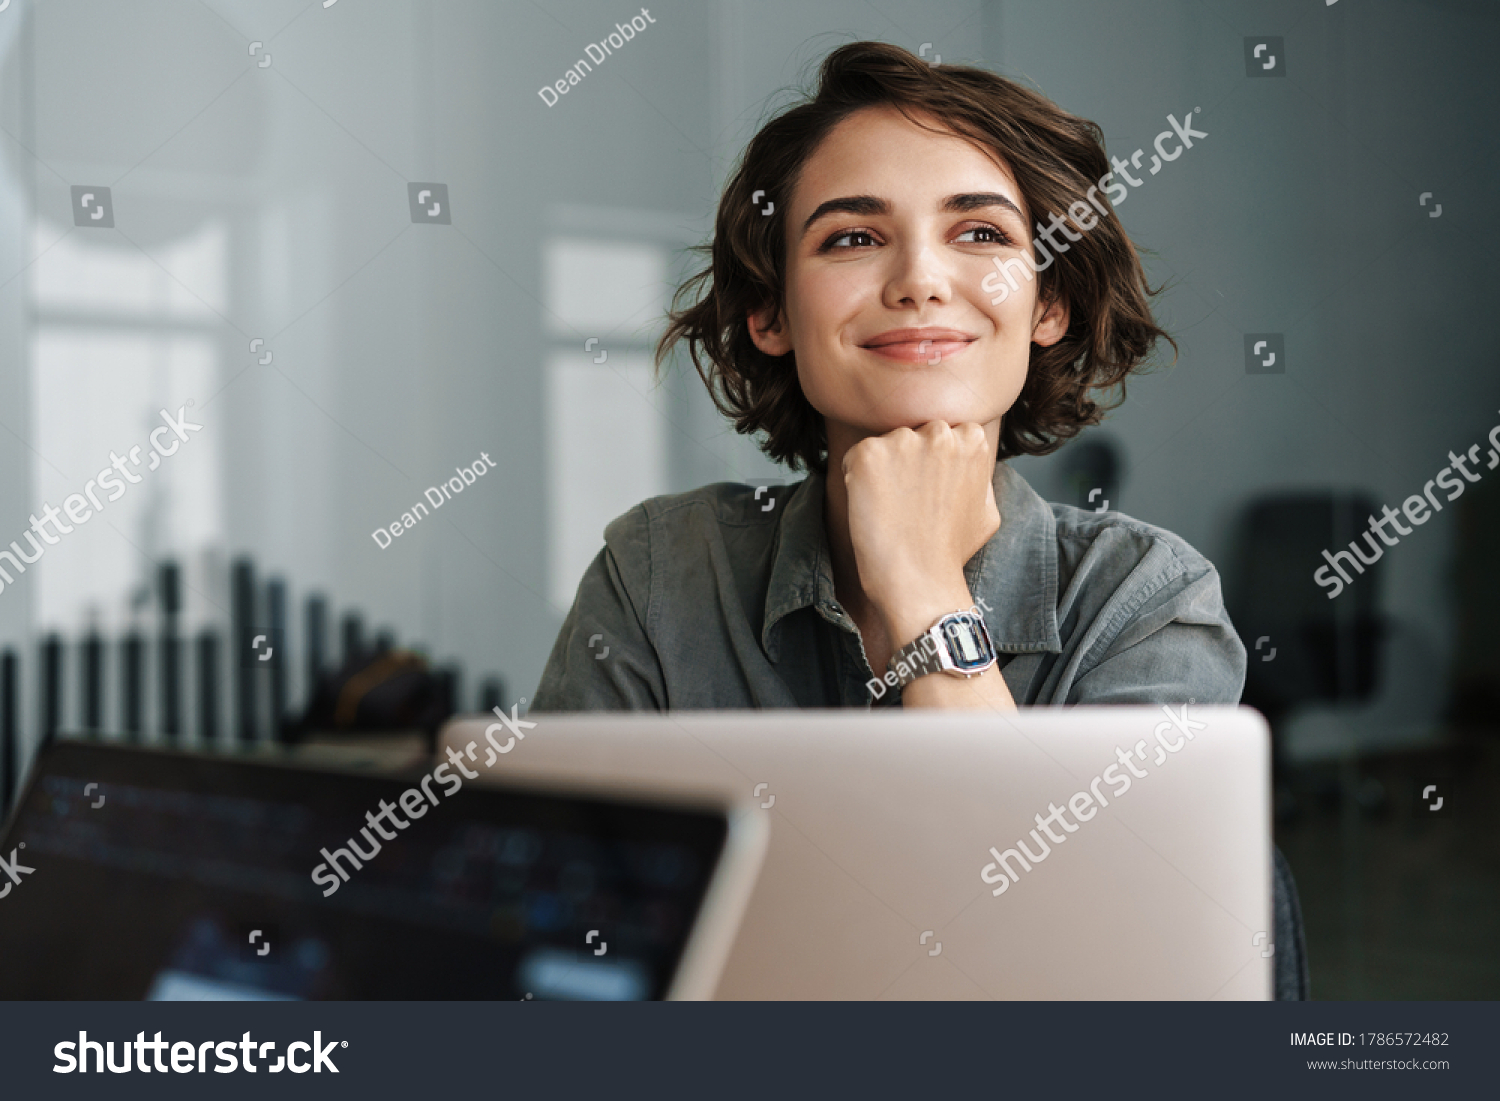 Image of young beautiful joyful woman smiling while working with laptop in office #1786572482